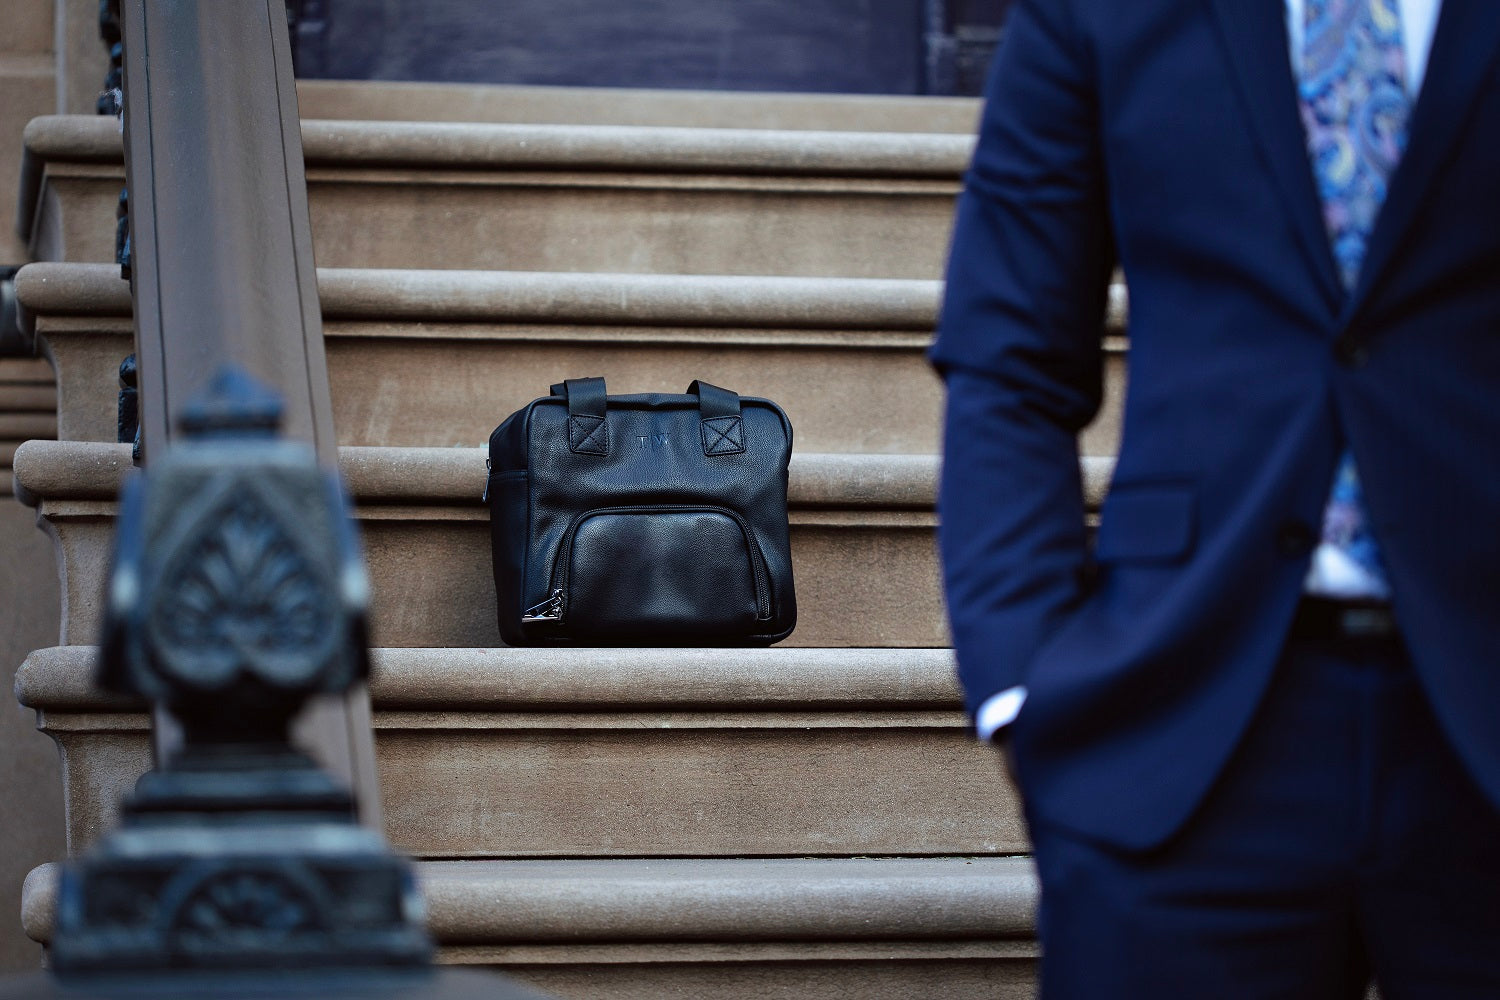 T|W lunch tote, in black, sitting on a step with a man in a suit, in front of the image